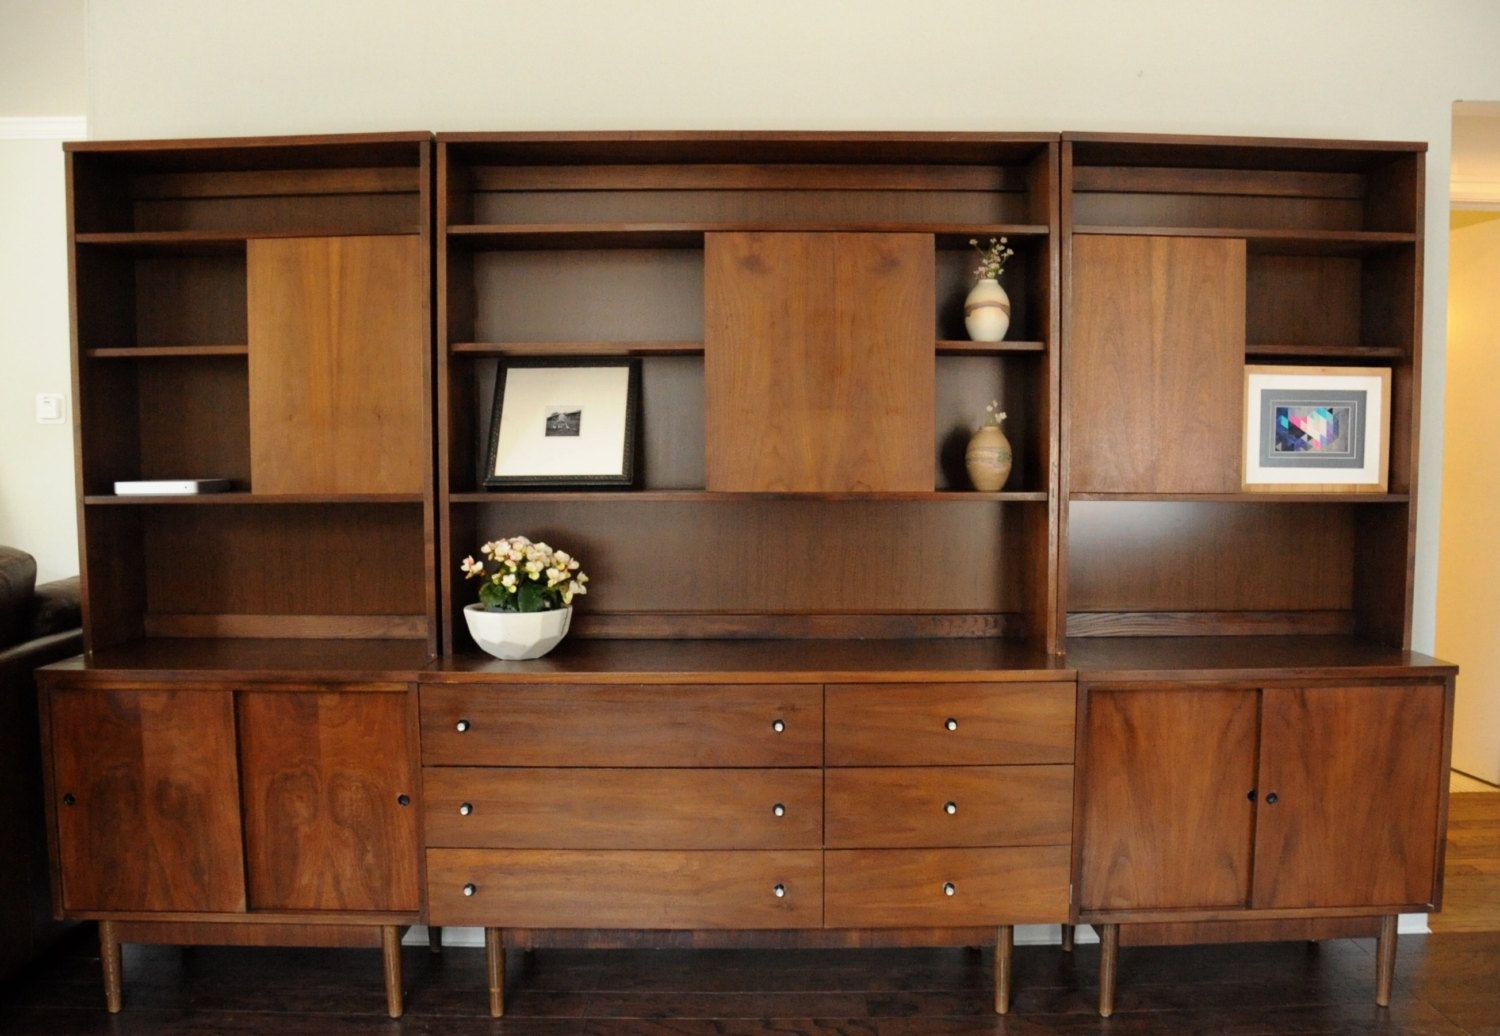 9 Ft Mcm Danish Scandinavian Walnut Wall Unit / Entertainment Center With Mid Century Entertainment Centers (View 19 of 20)